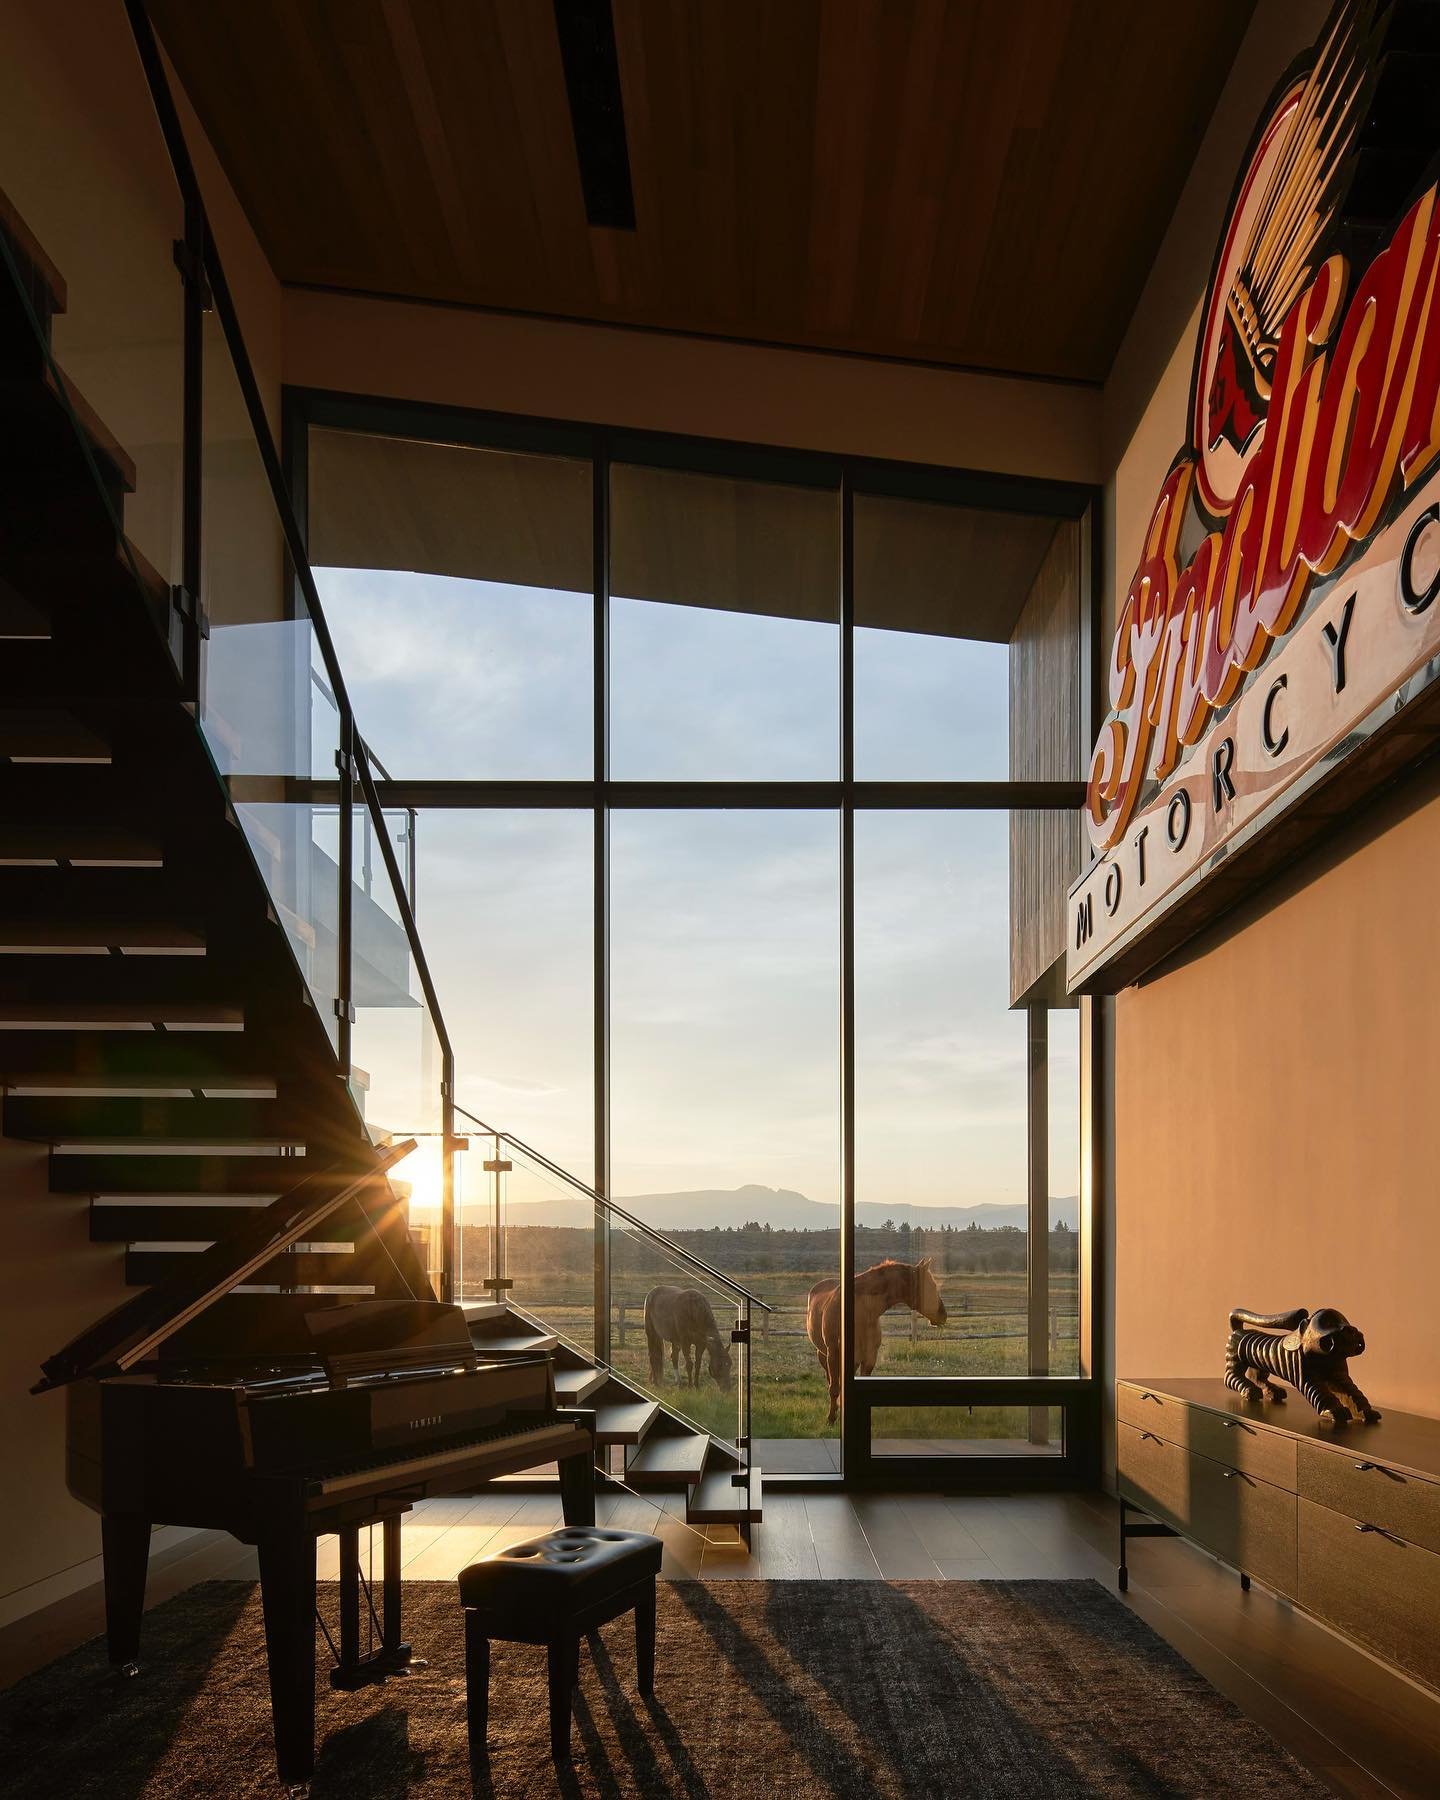 More on that @clbarchitects project I covered for @big_sky_journal. Big impact foyer, horses a bonus! The nearby barn is sleek, with clean lines and a skylight running its length to provide lots of natural light. 

&bull;
Photo by Matthew Millman (@m